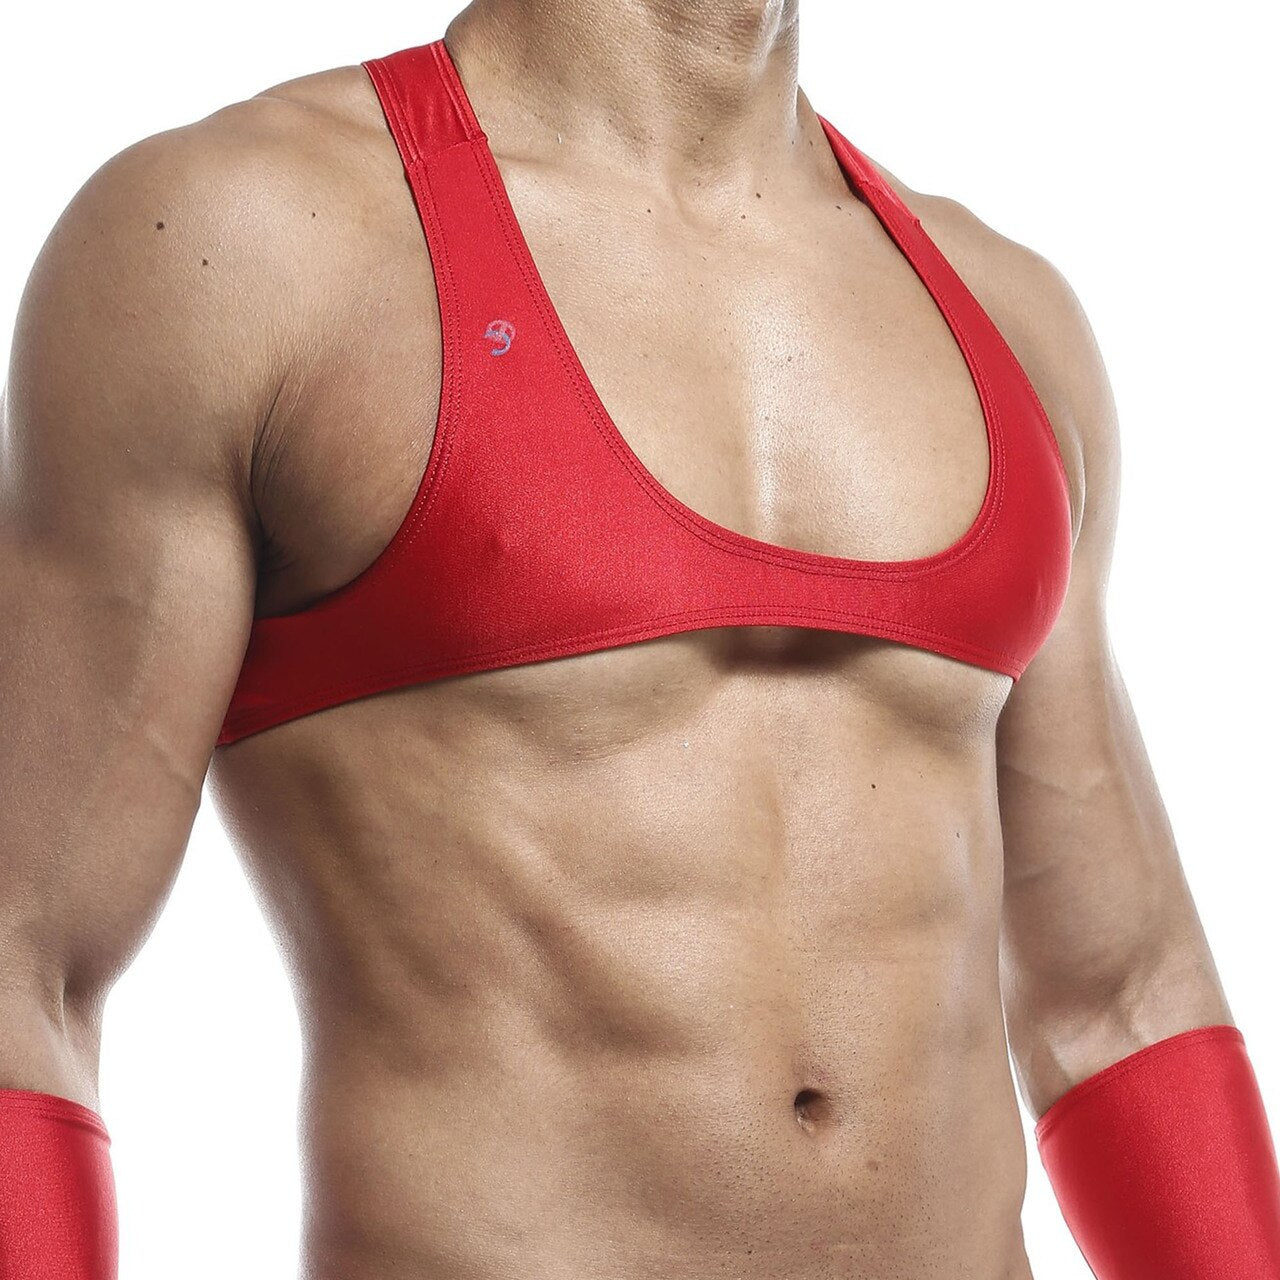 SALE - Mens Joe Snyder Stretch Spandex Posing Top with Y Back Red